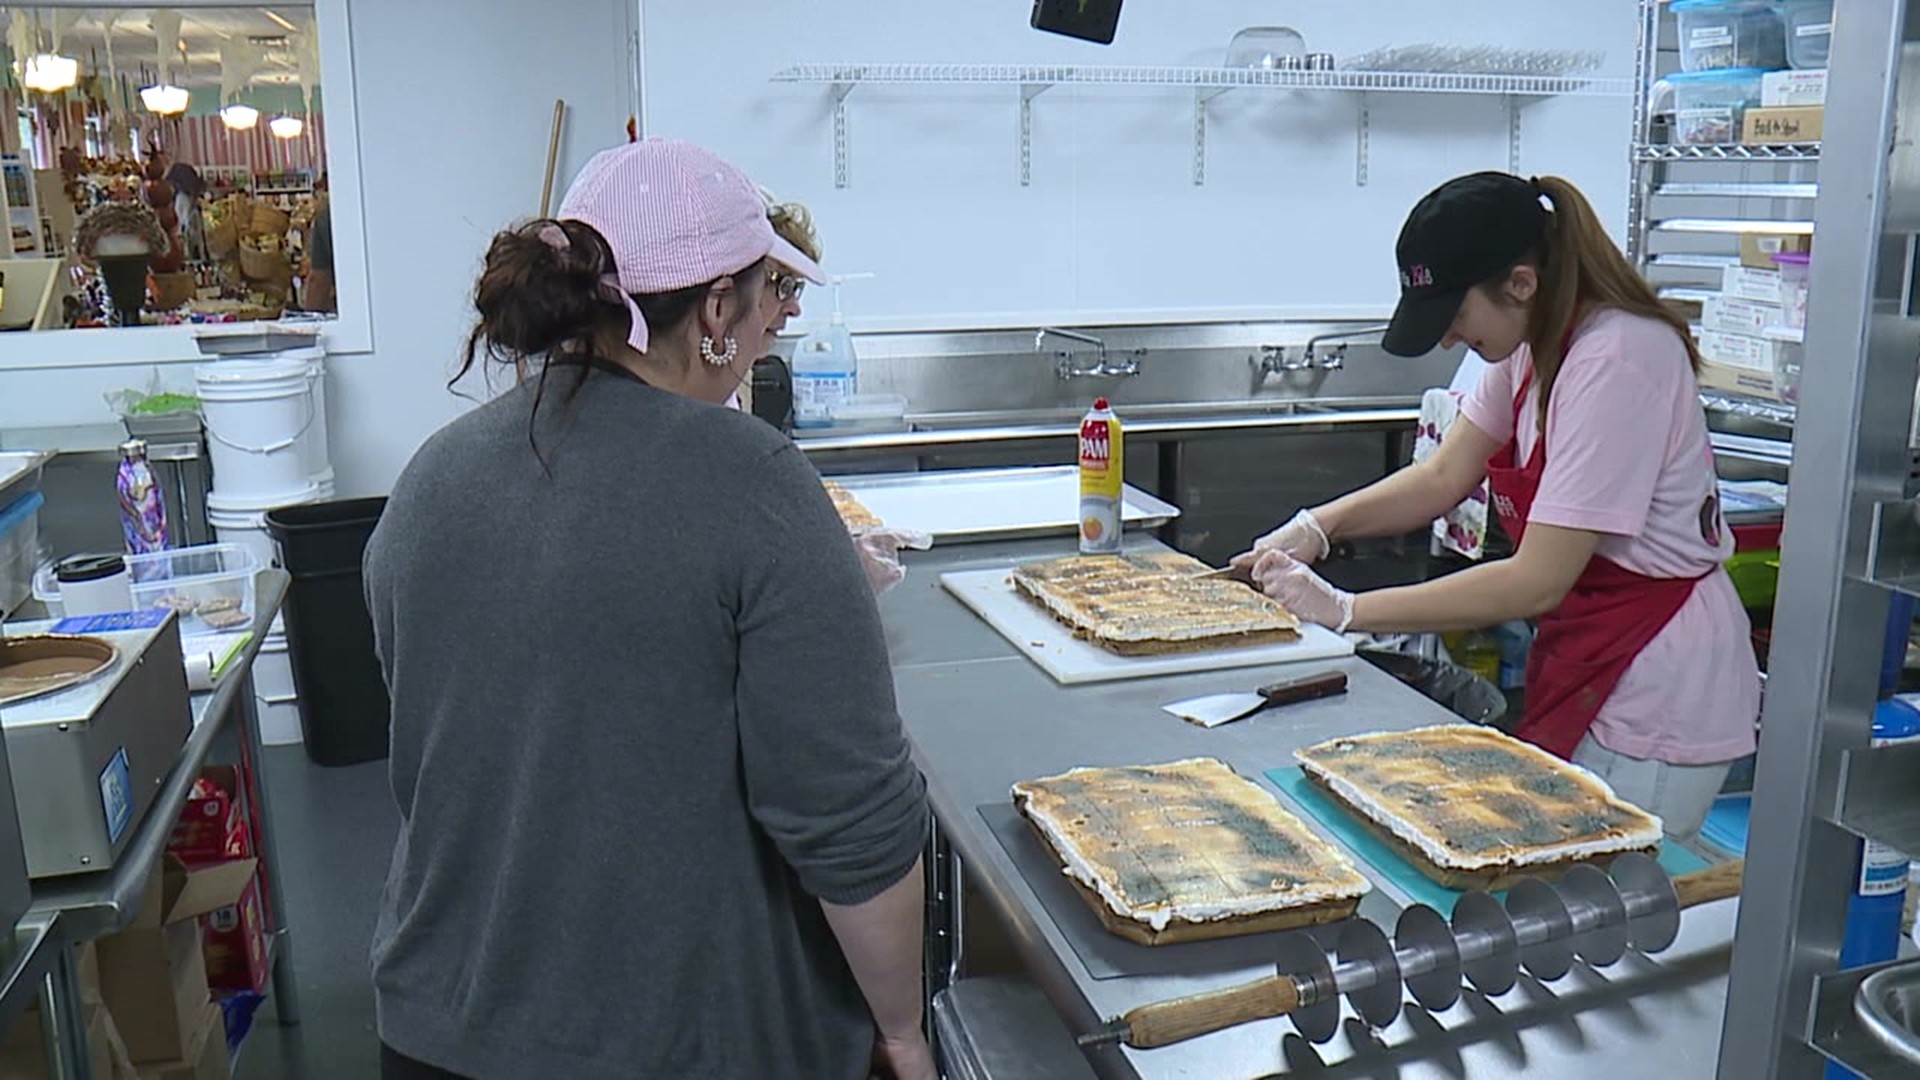 Some businesses in Lackawanna County are not experiencing a shortage of workers as the holidays approach.